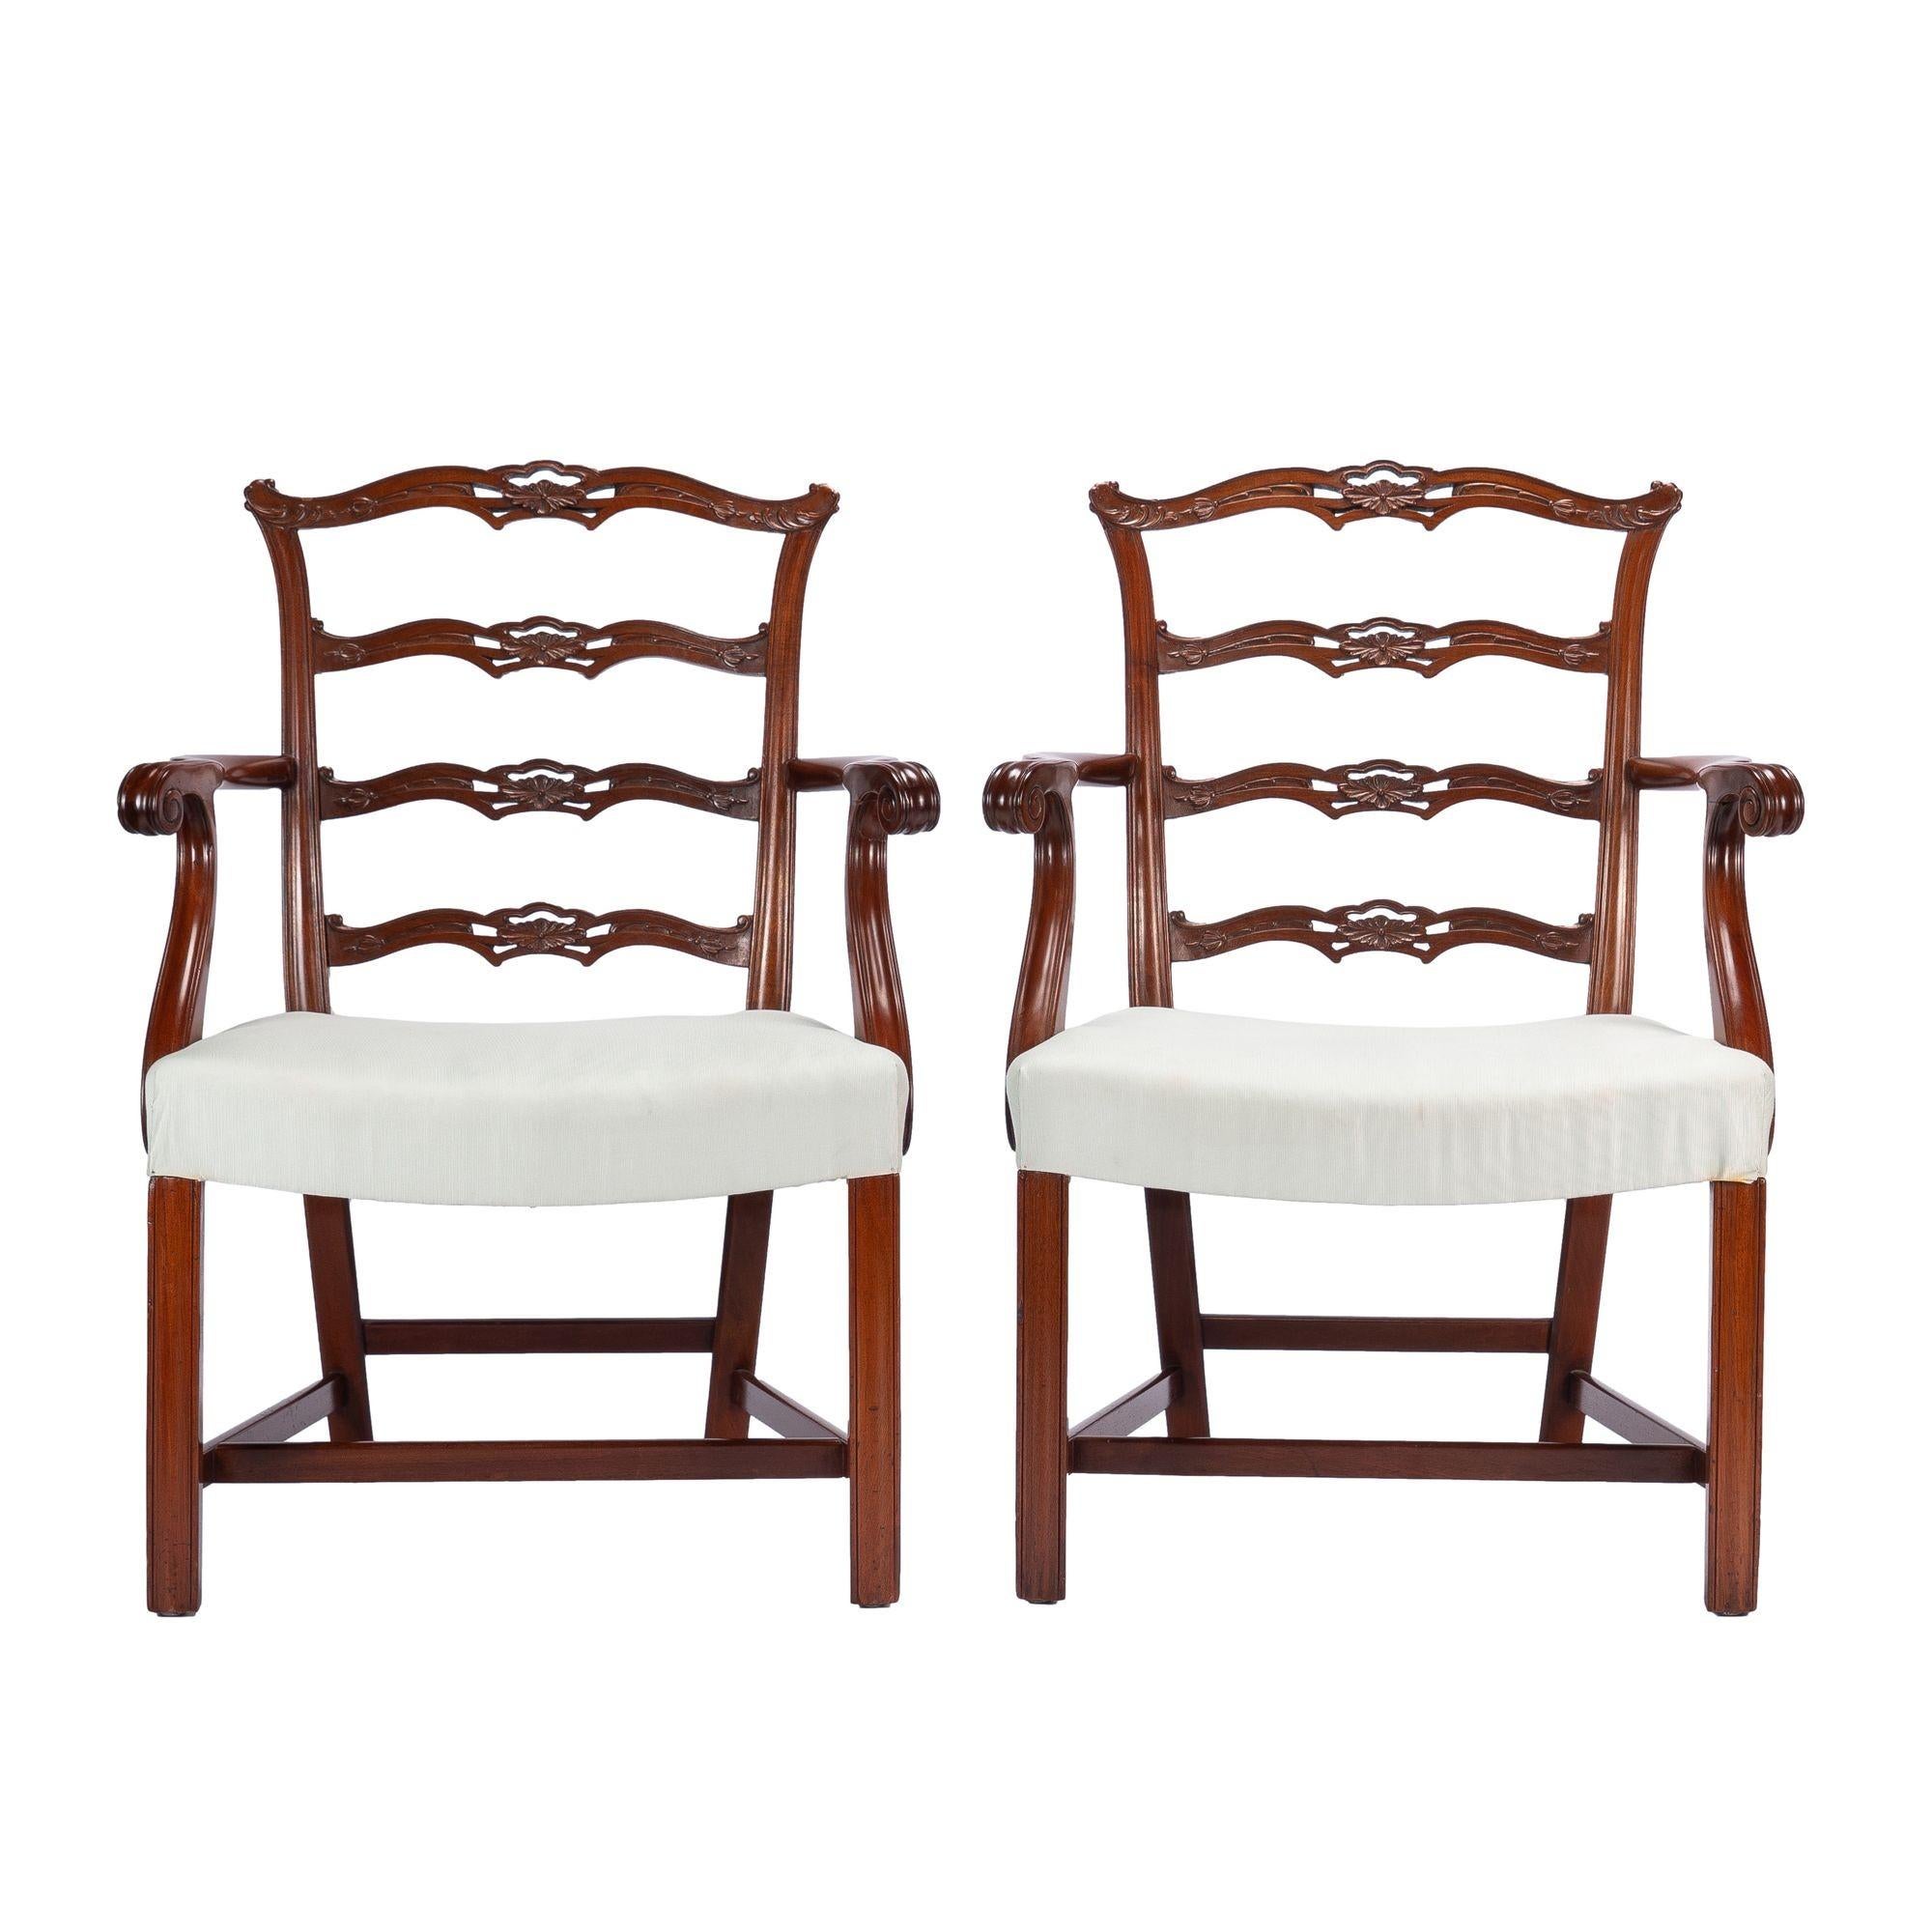 Pair of Academic Revival Chippendale solid mahogany arm chairs with exceptional pierced and carved ladder back rails. The over rail upholstered saddle seat is supported by molding carved square legs which are joined by an “H” stretcher. The shaped